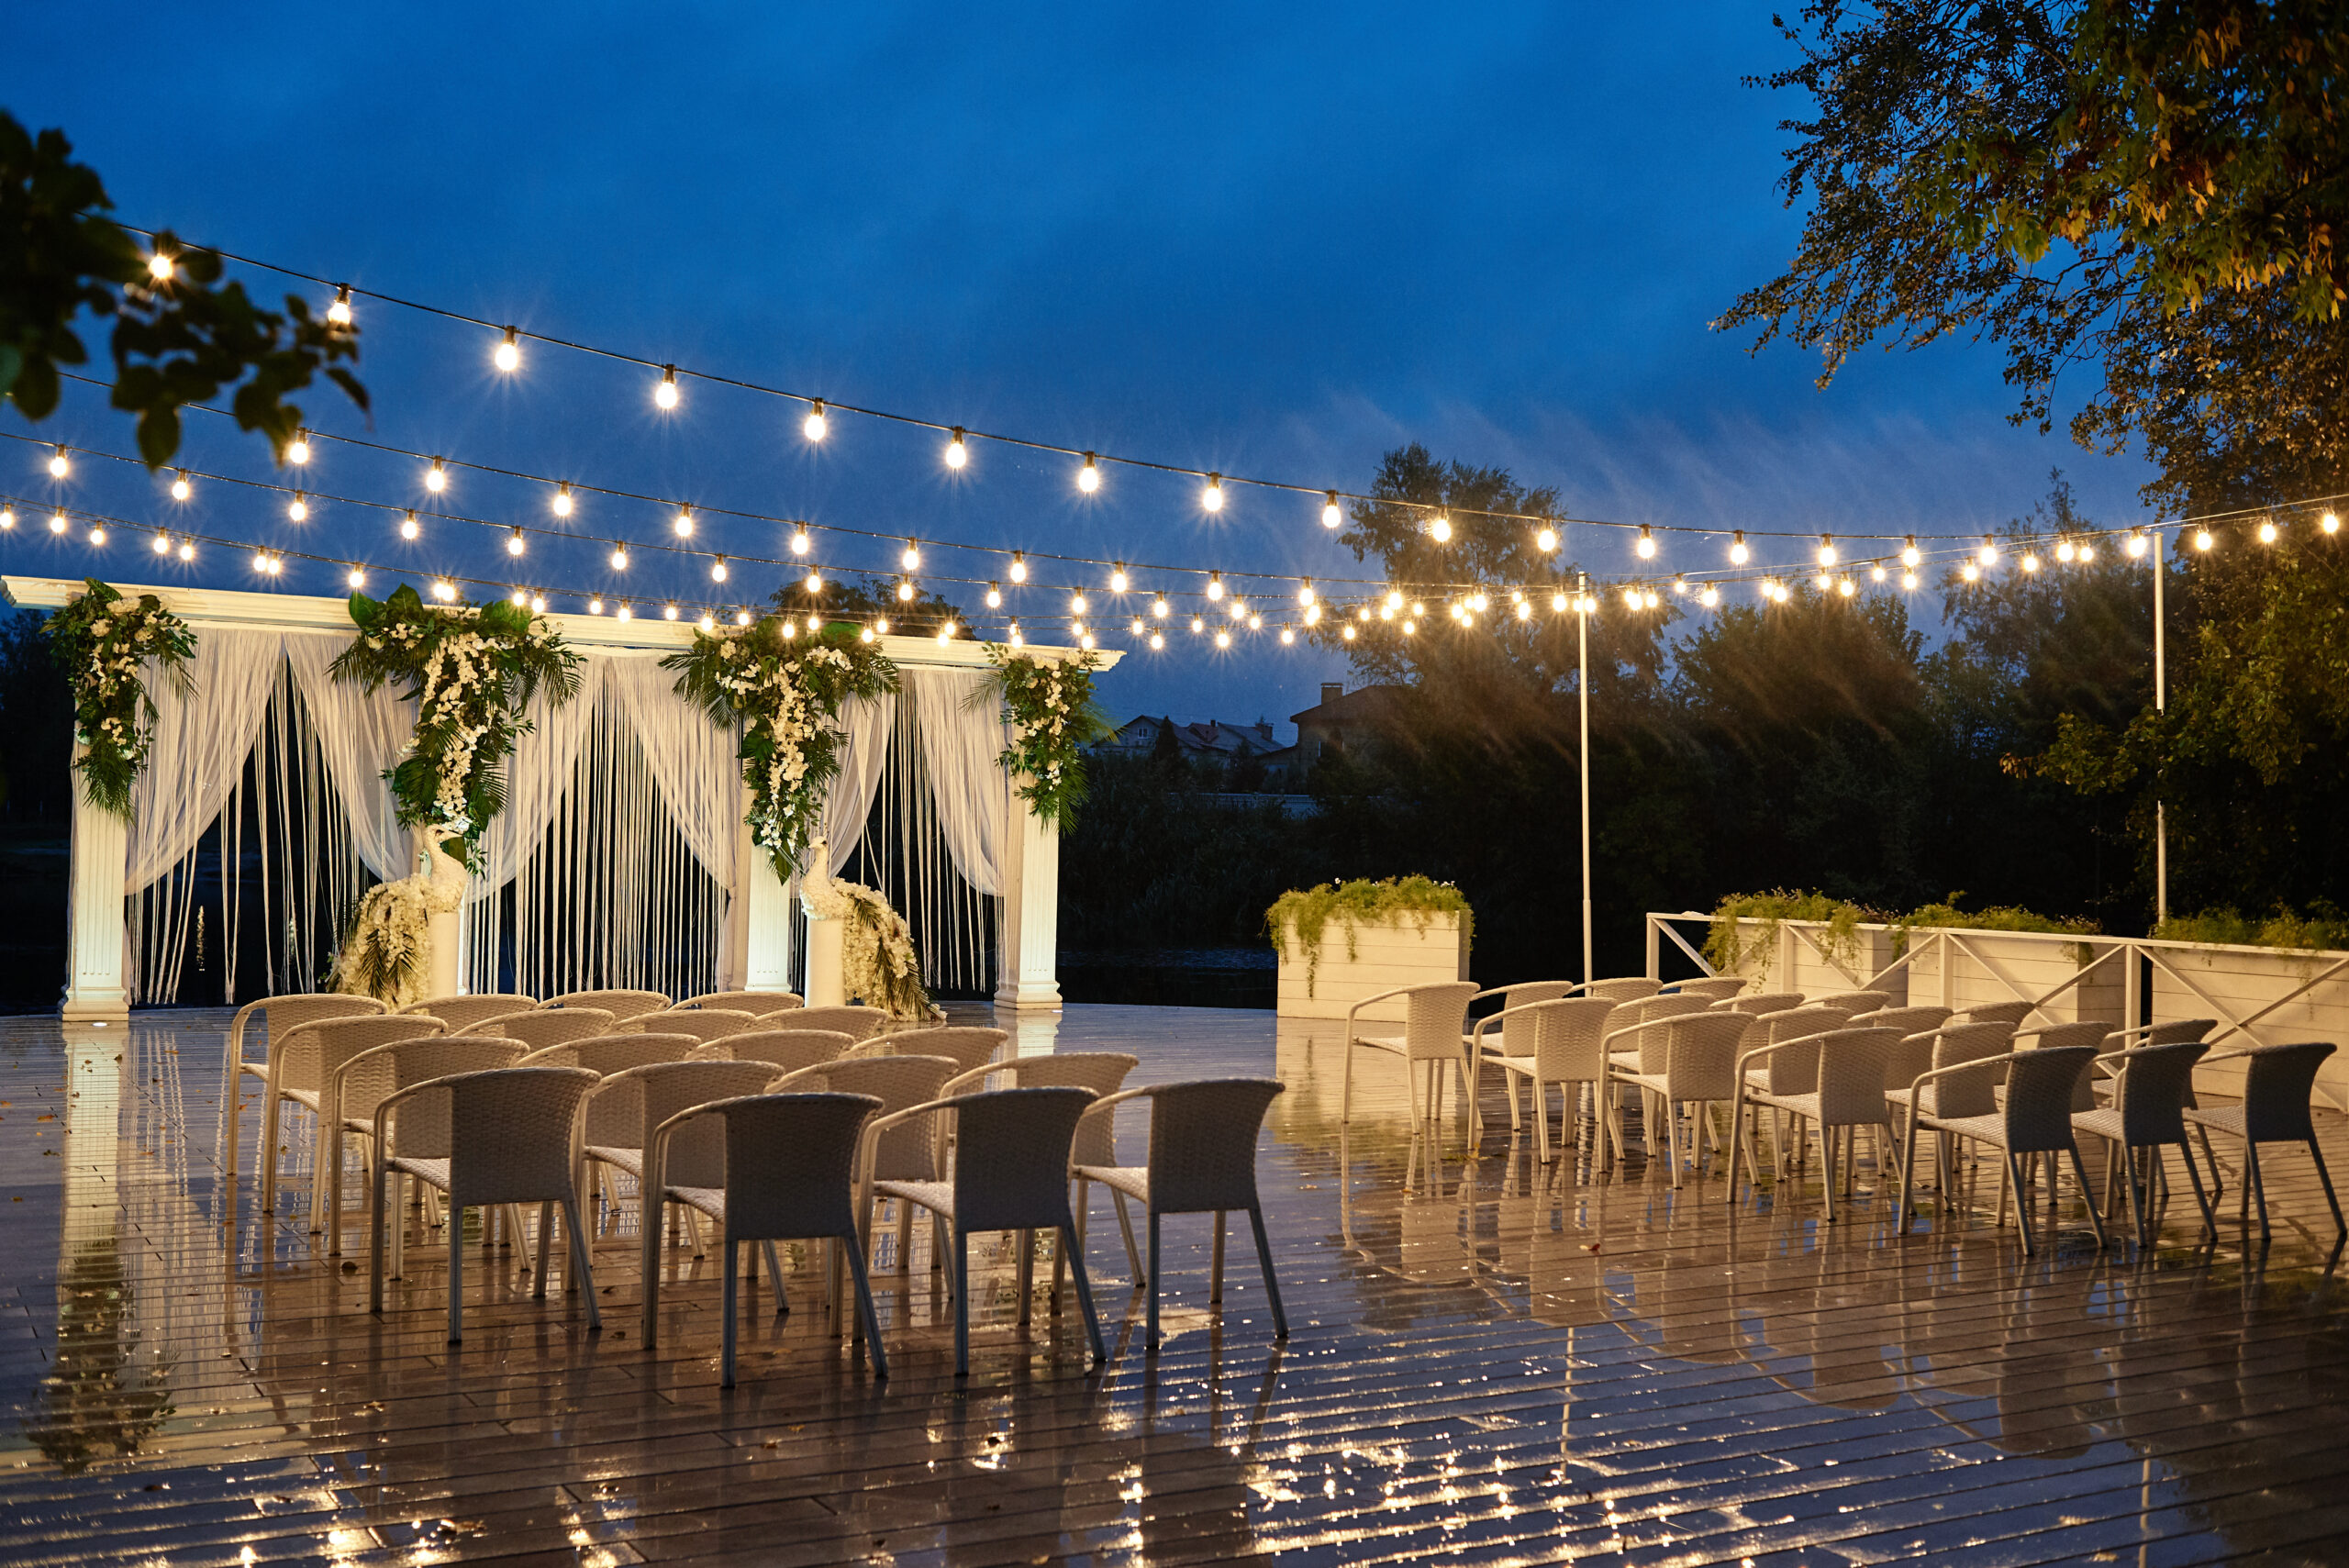 night wedding ceremony with arch, orchid flowers, chairs and bulb lights in forest outdoors, copy space. wedding decorations